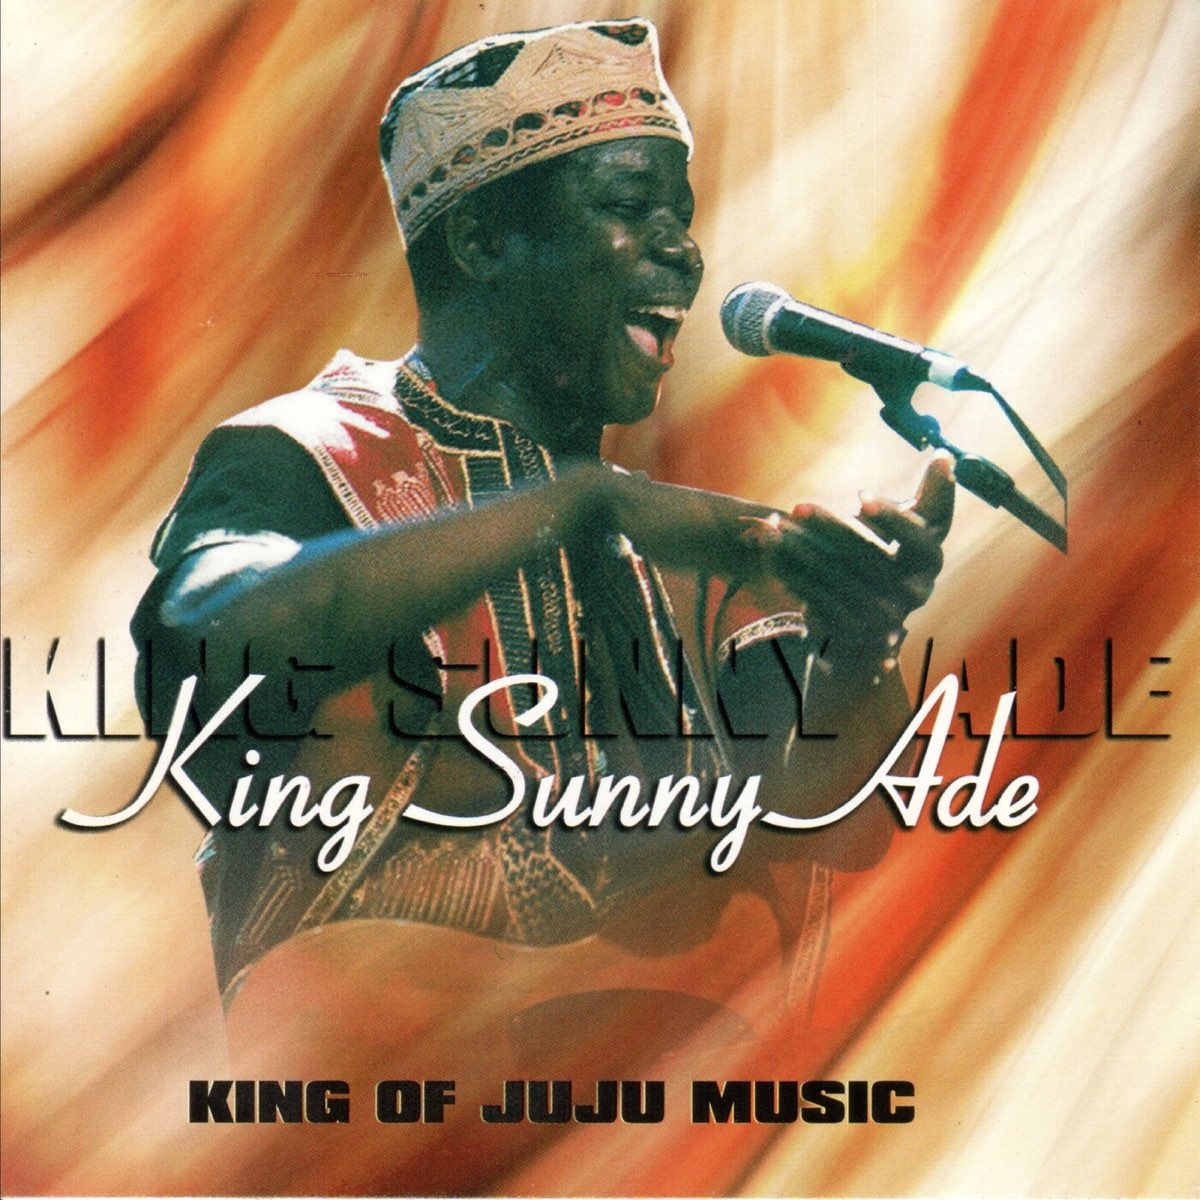 King of Juju Music - Album by King Sunny Ade - Apple Music